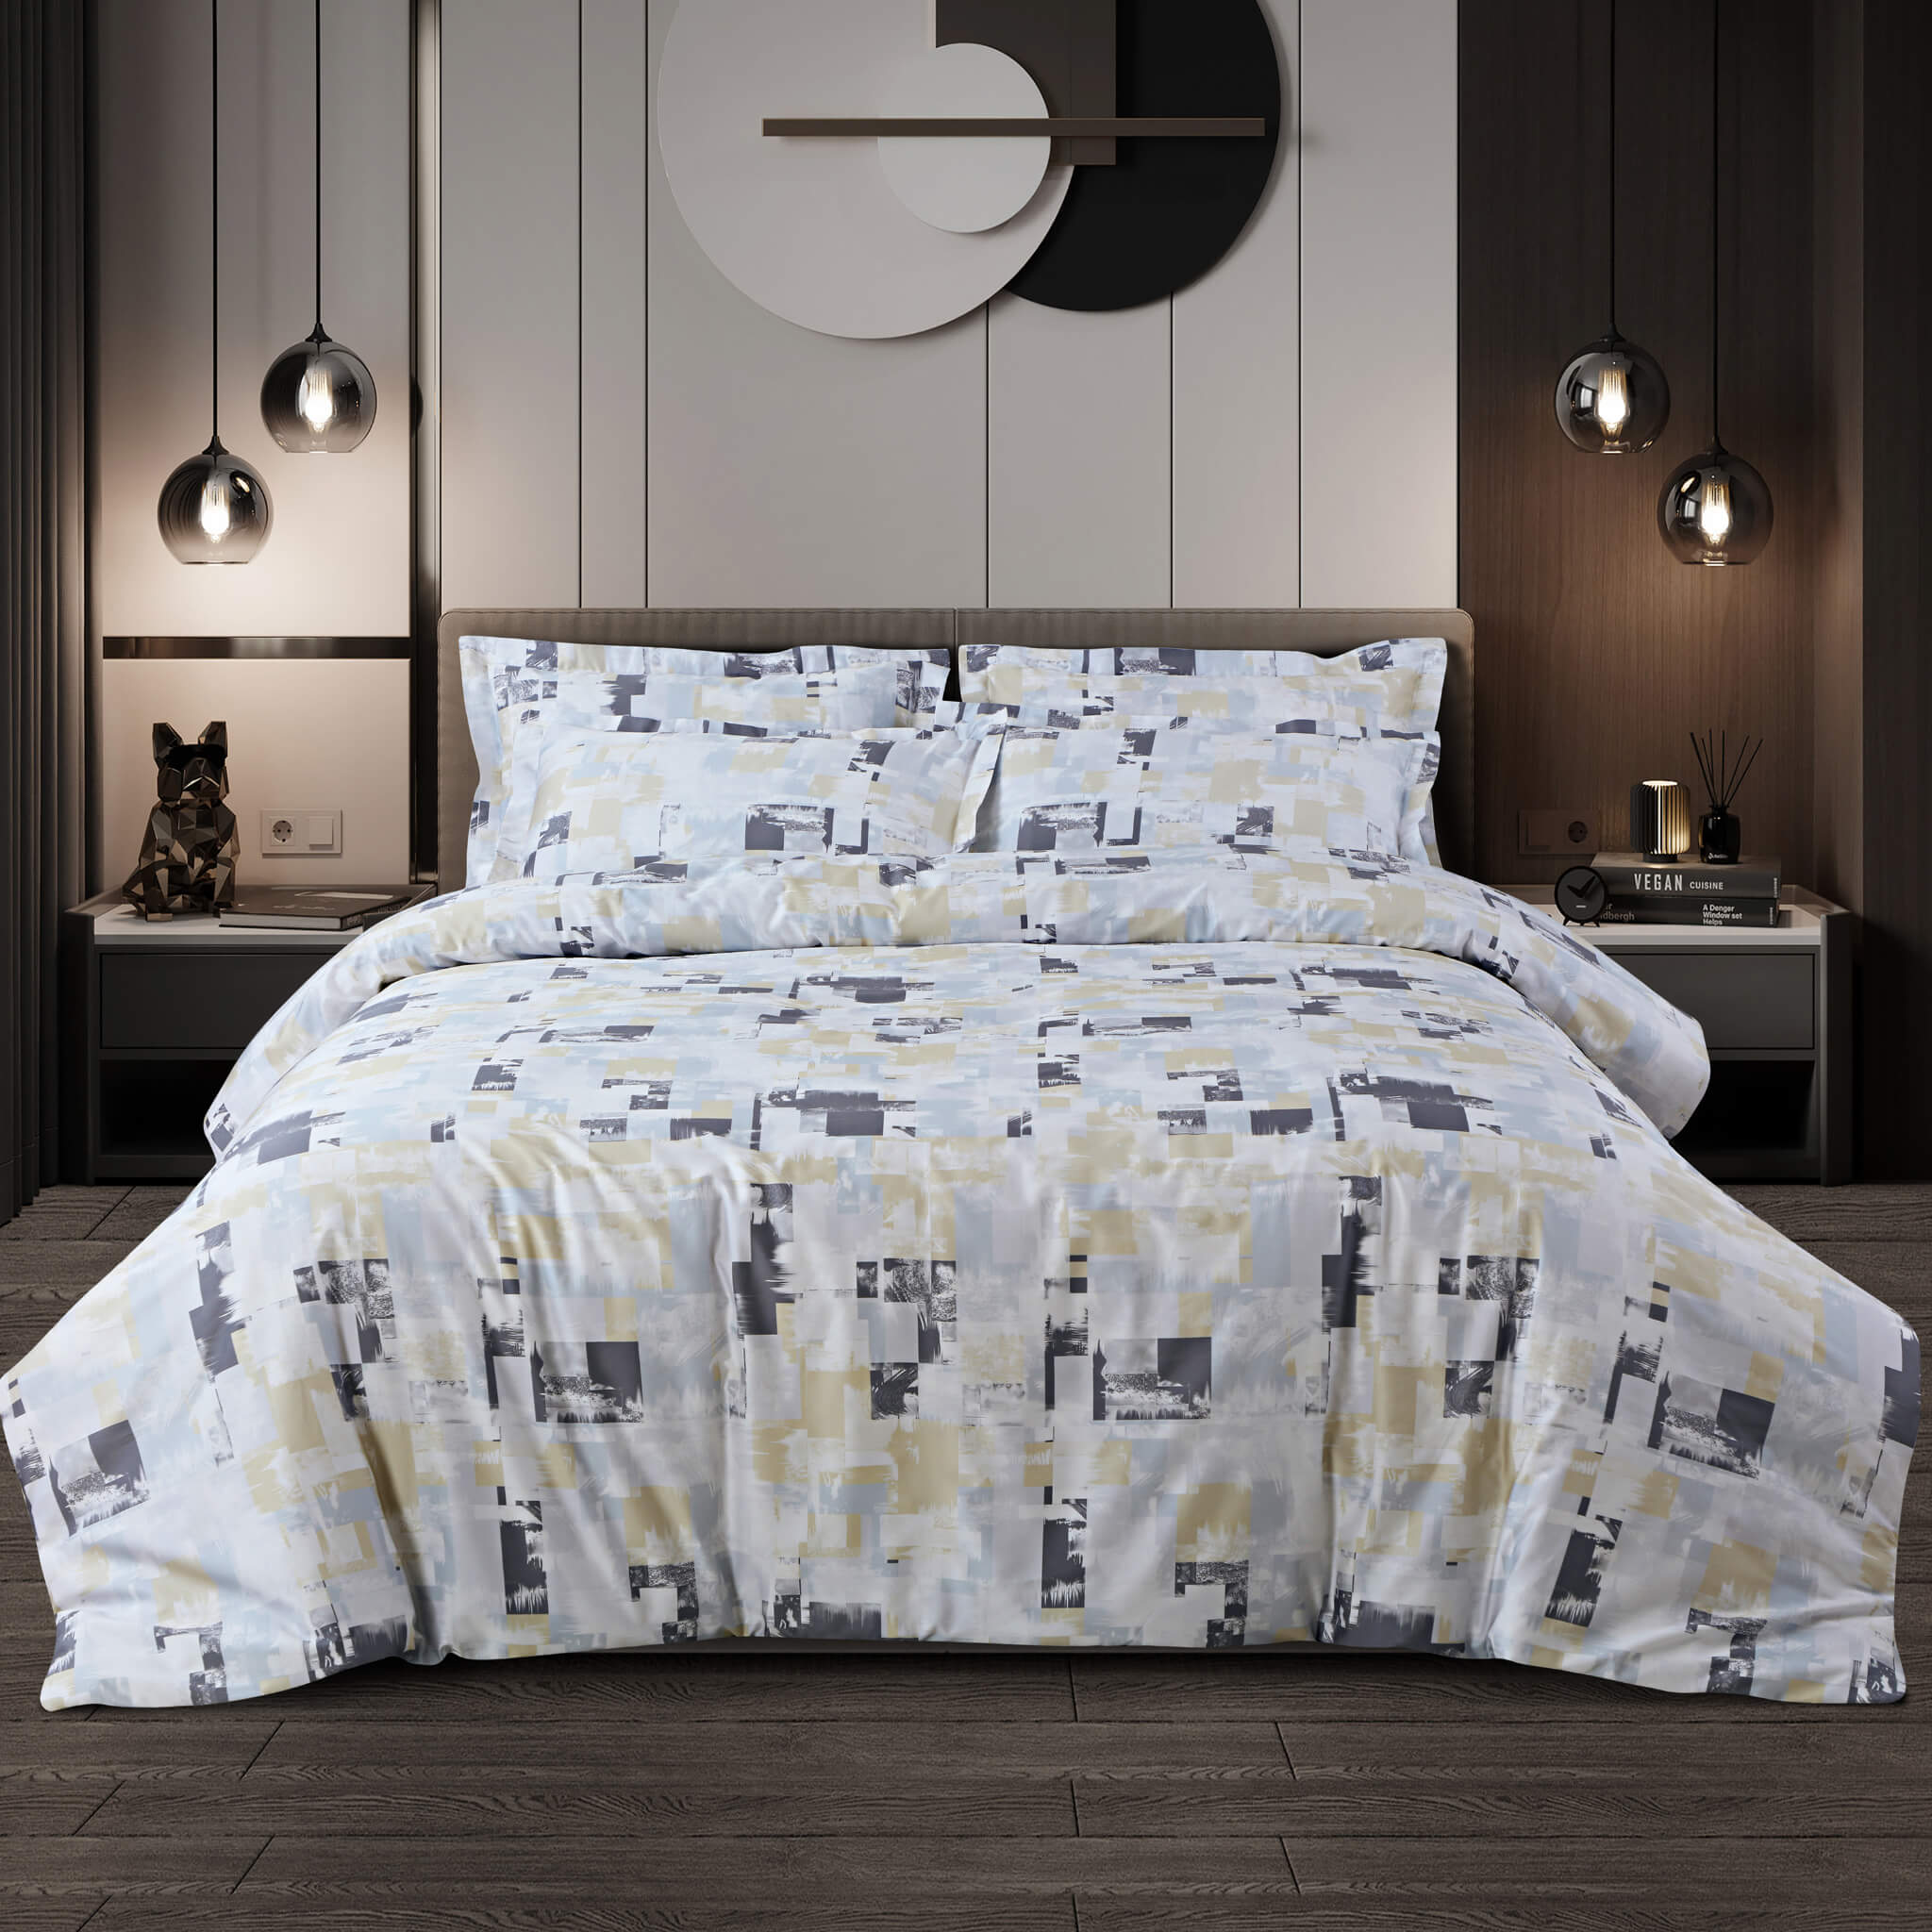 Malako Caèn Bedding Set - White & Blue Abstract 100% Cotton King Size Bedsheet With Comforter